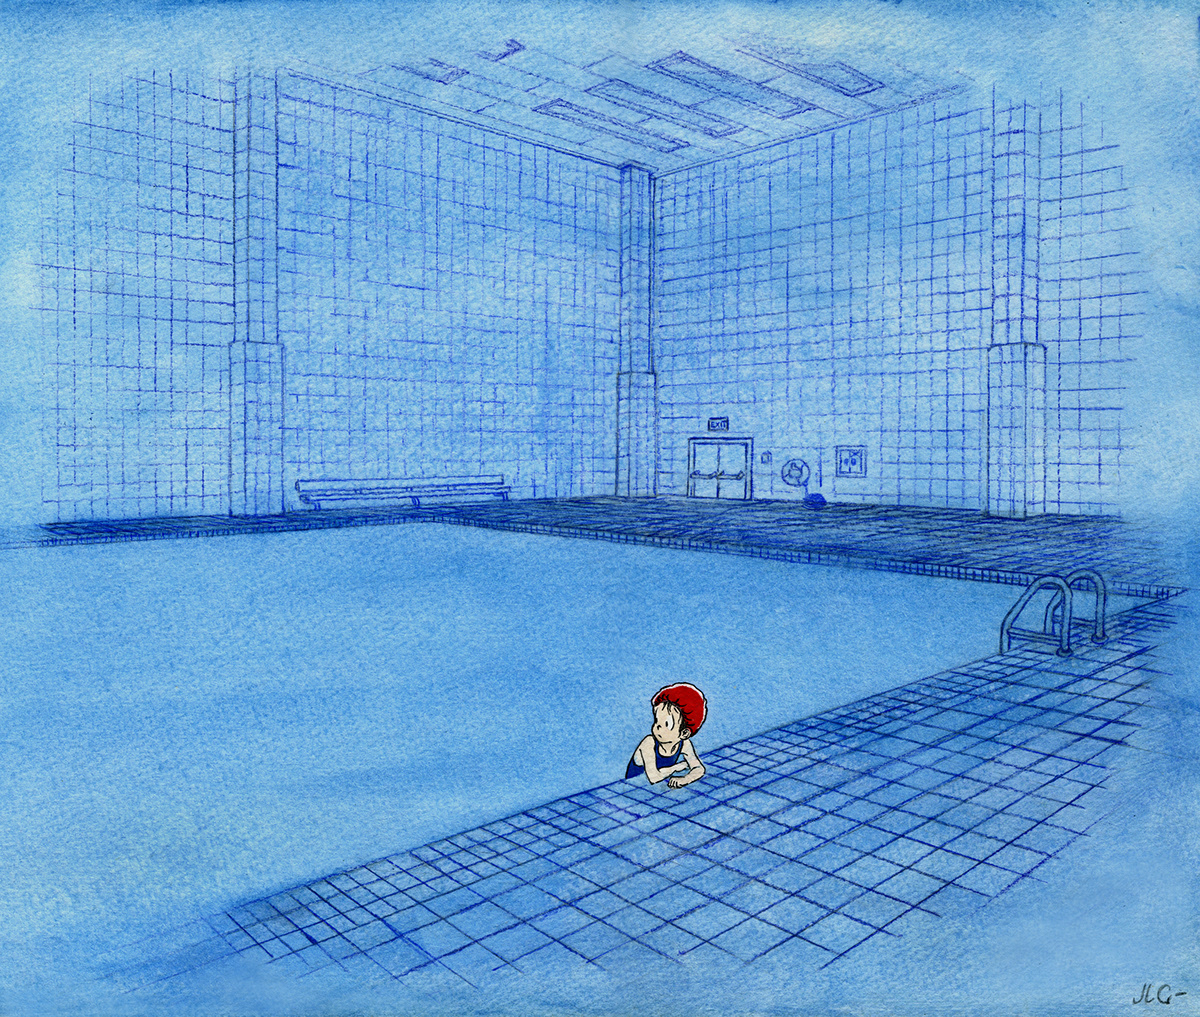 swimming Pool loneliness Sadness depression fear anxiety cold pain child girl blue